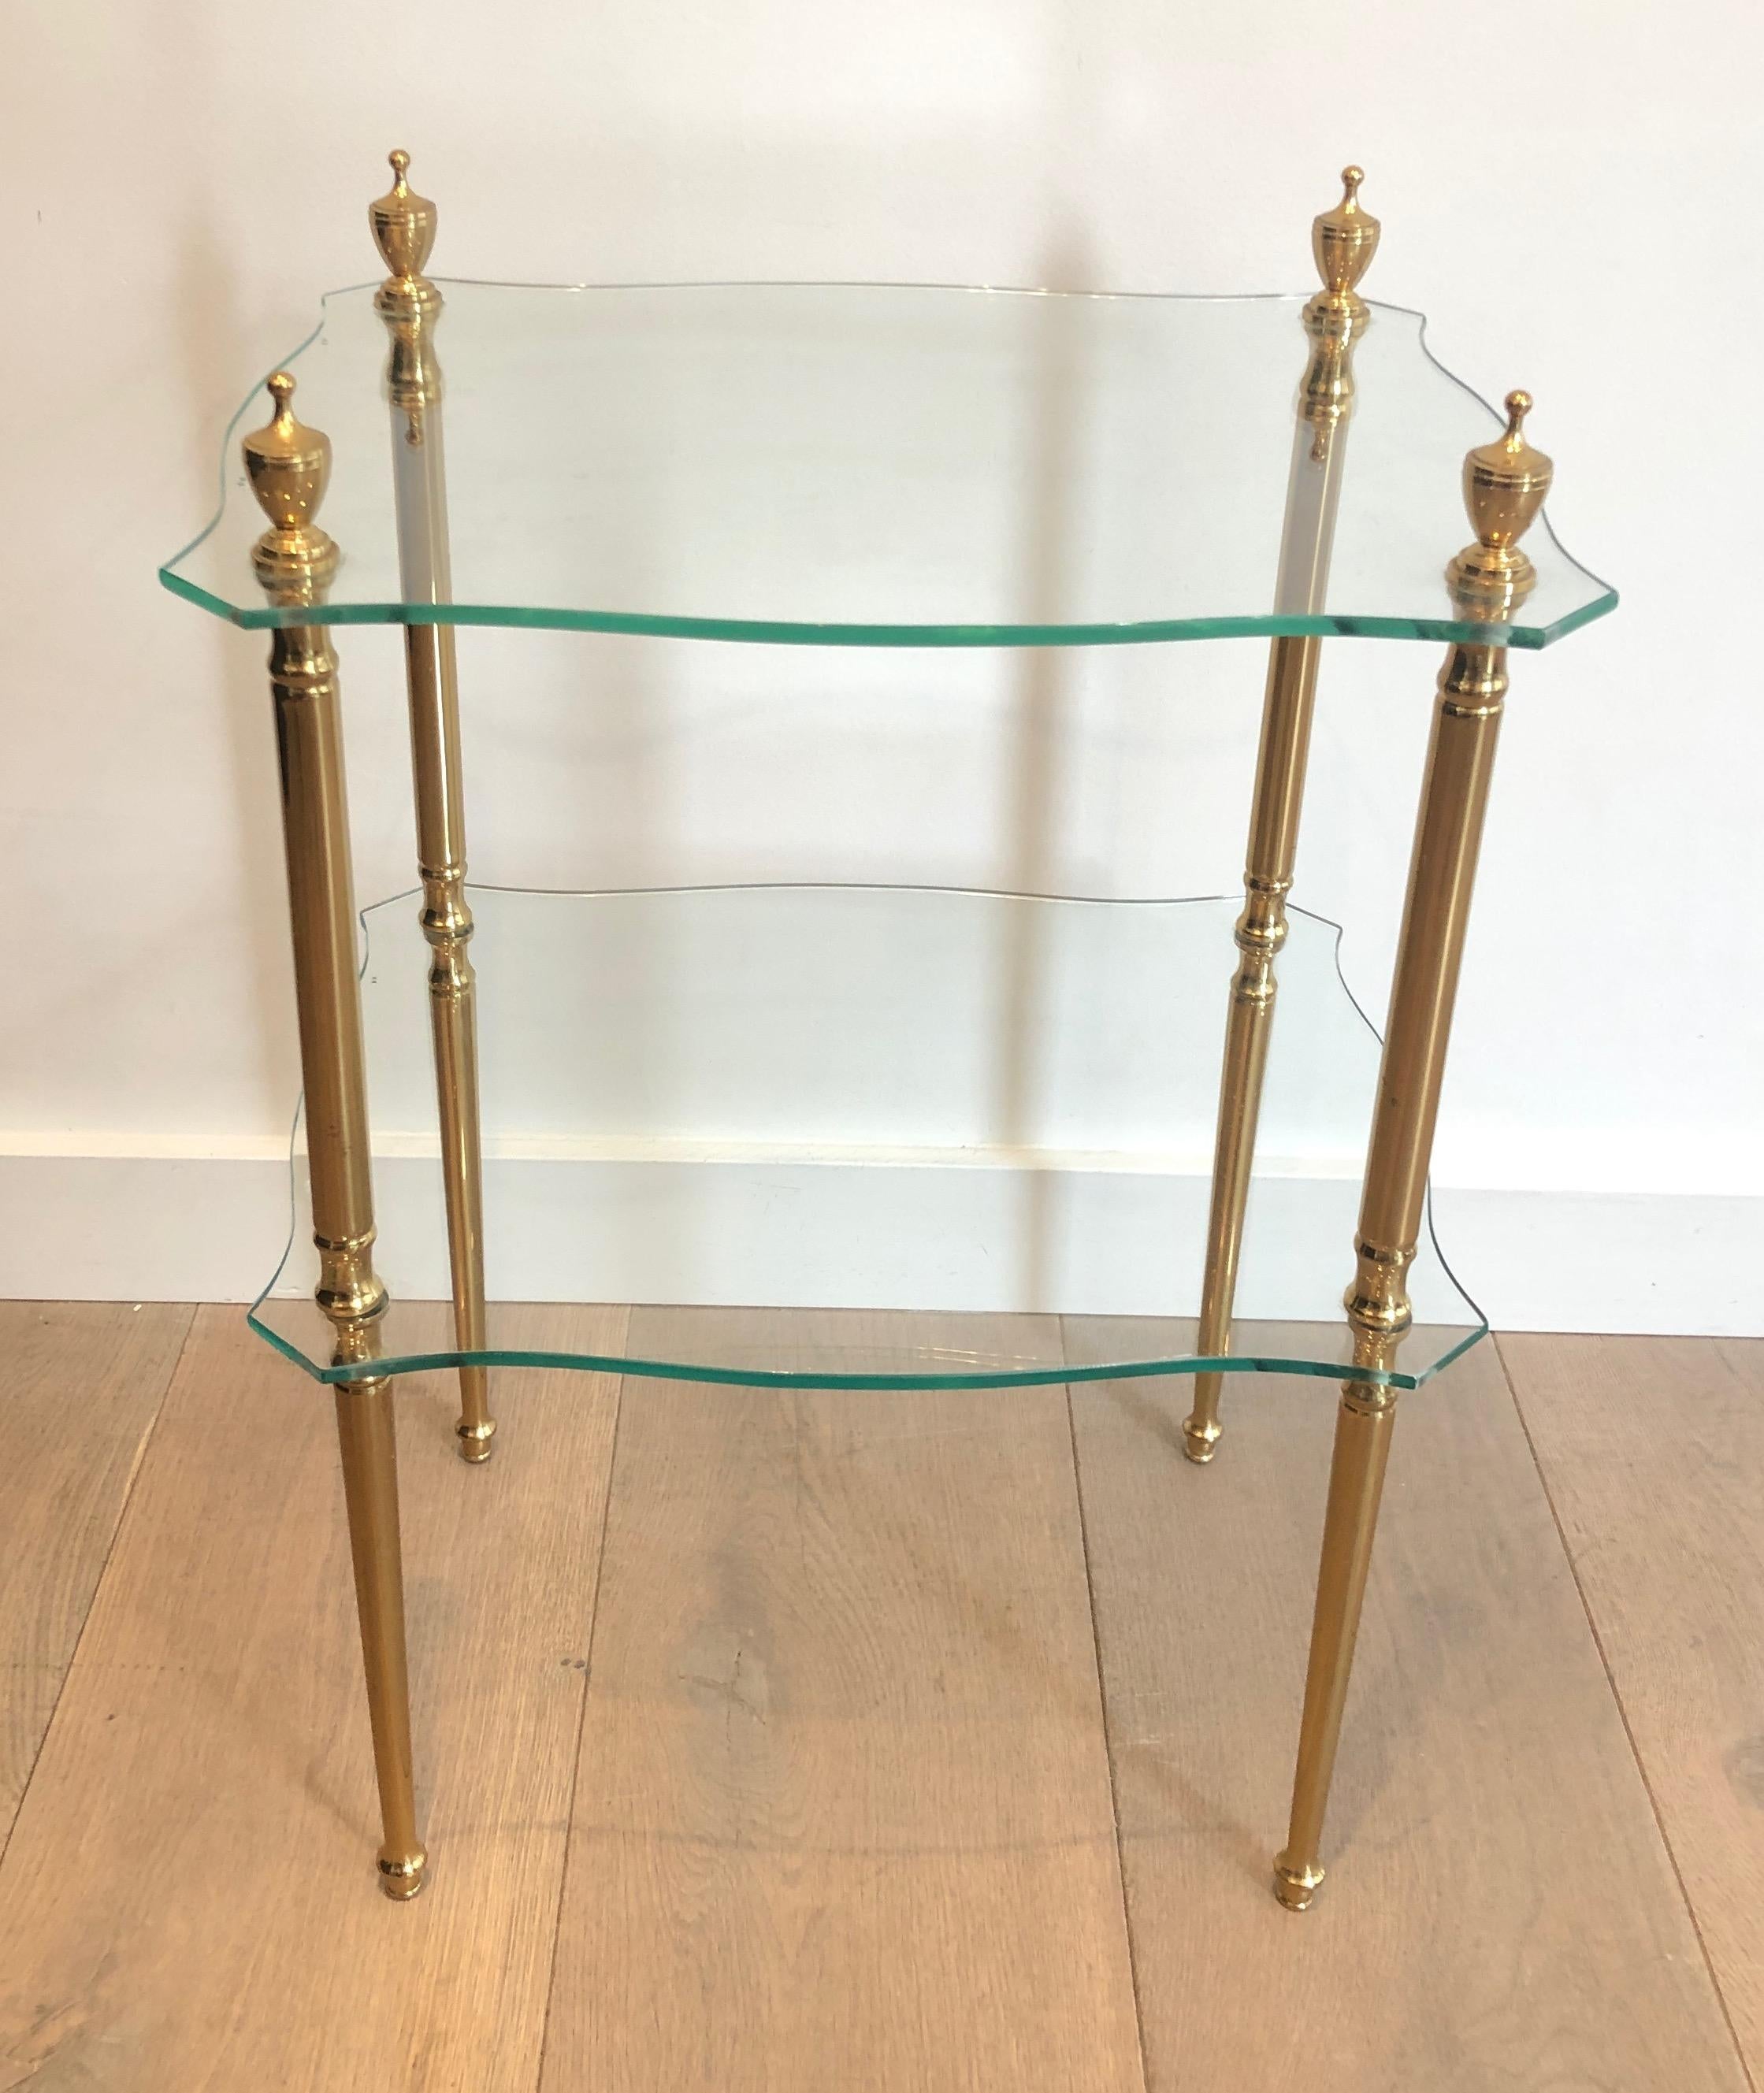 This neoclassical style side tableis made of brass with fluted legs and 2 glass shelves. This is a work by famous French designer Maison Jansen. Circa 1940.